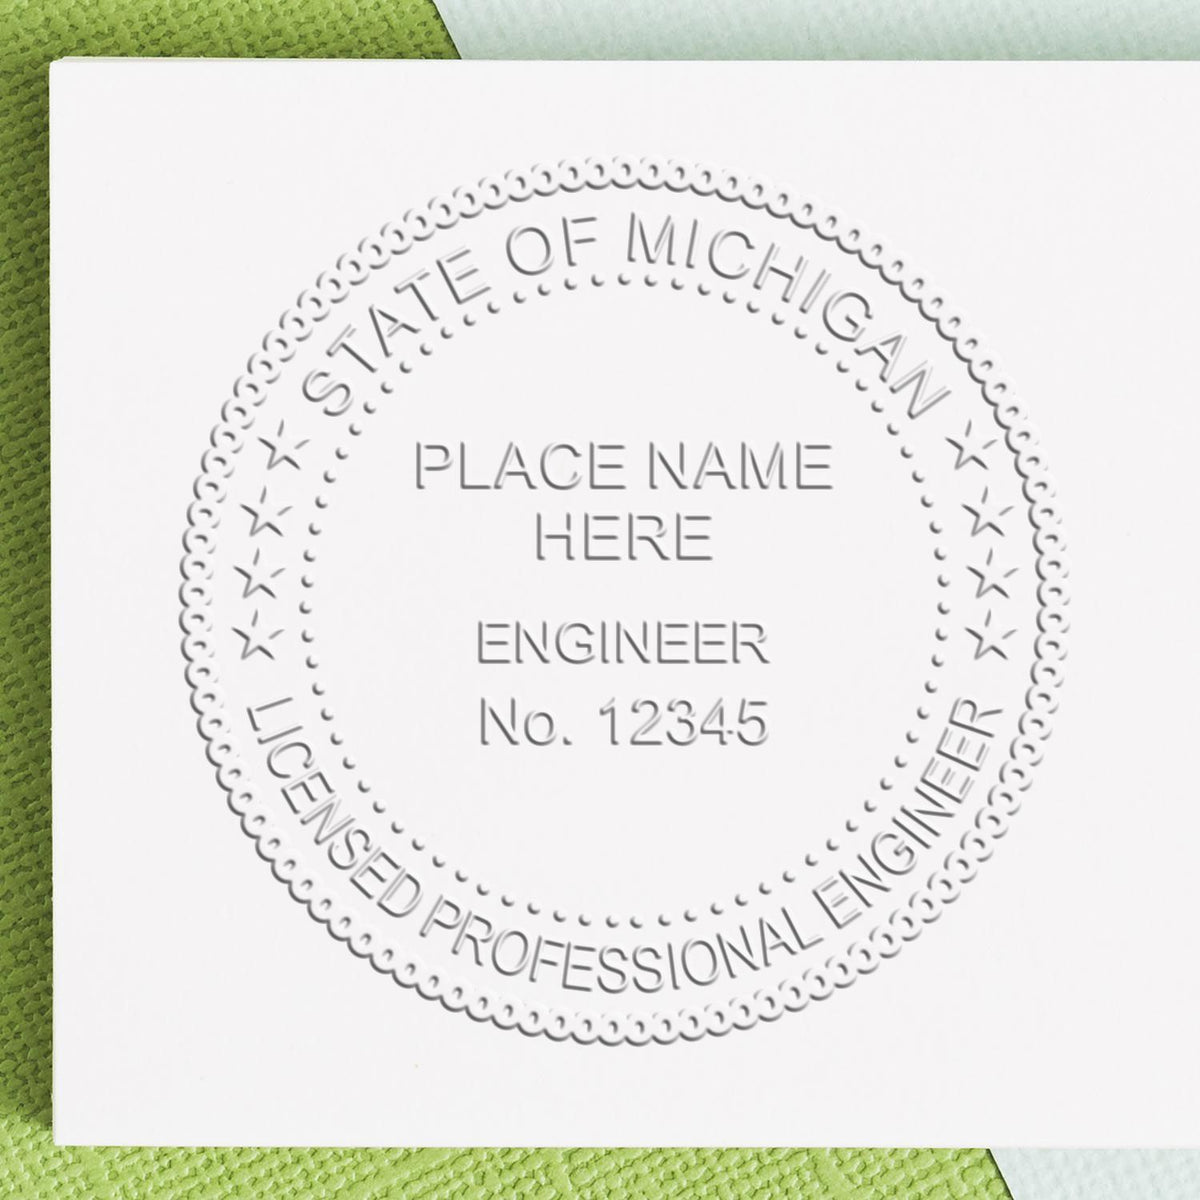 The State of Michigan Extended Long Reach Engineer Seal stamp impression comes to life with a crisp, detailed photo on paper - showcasing true professional quality.